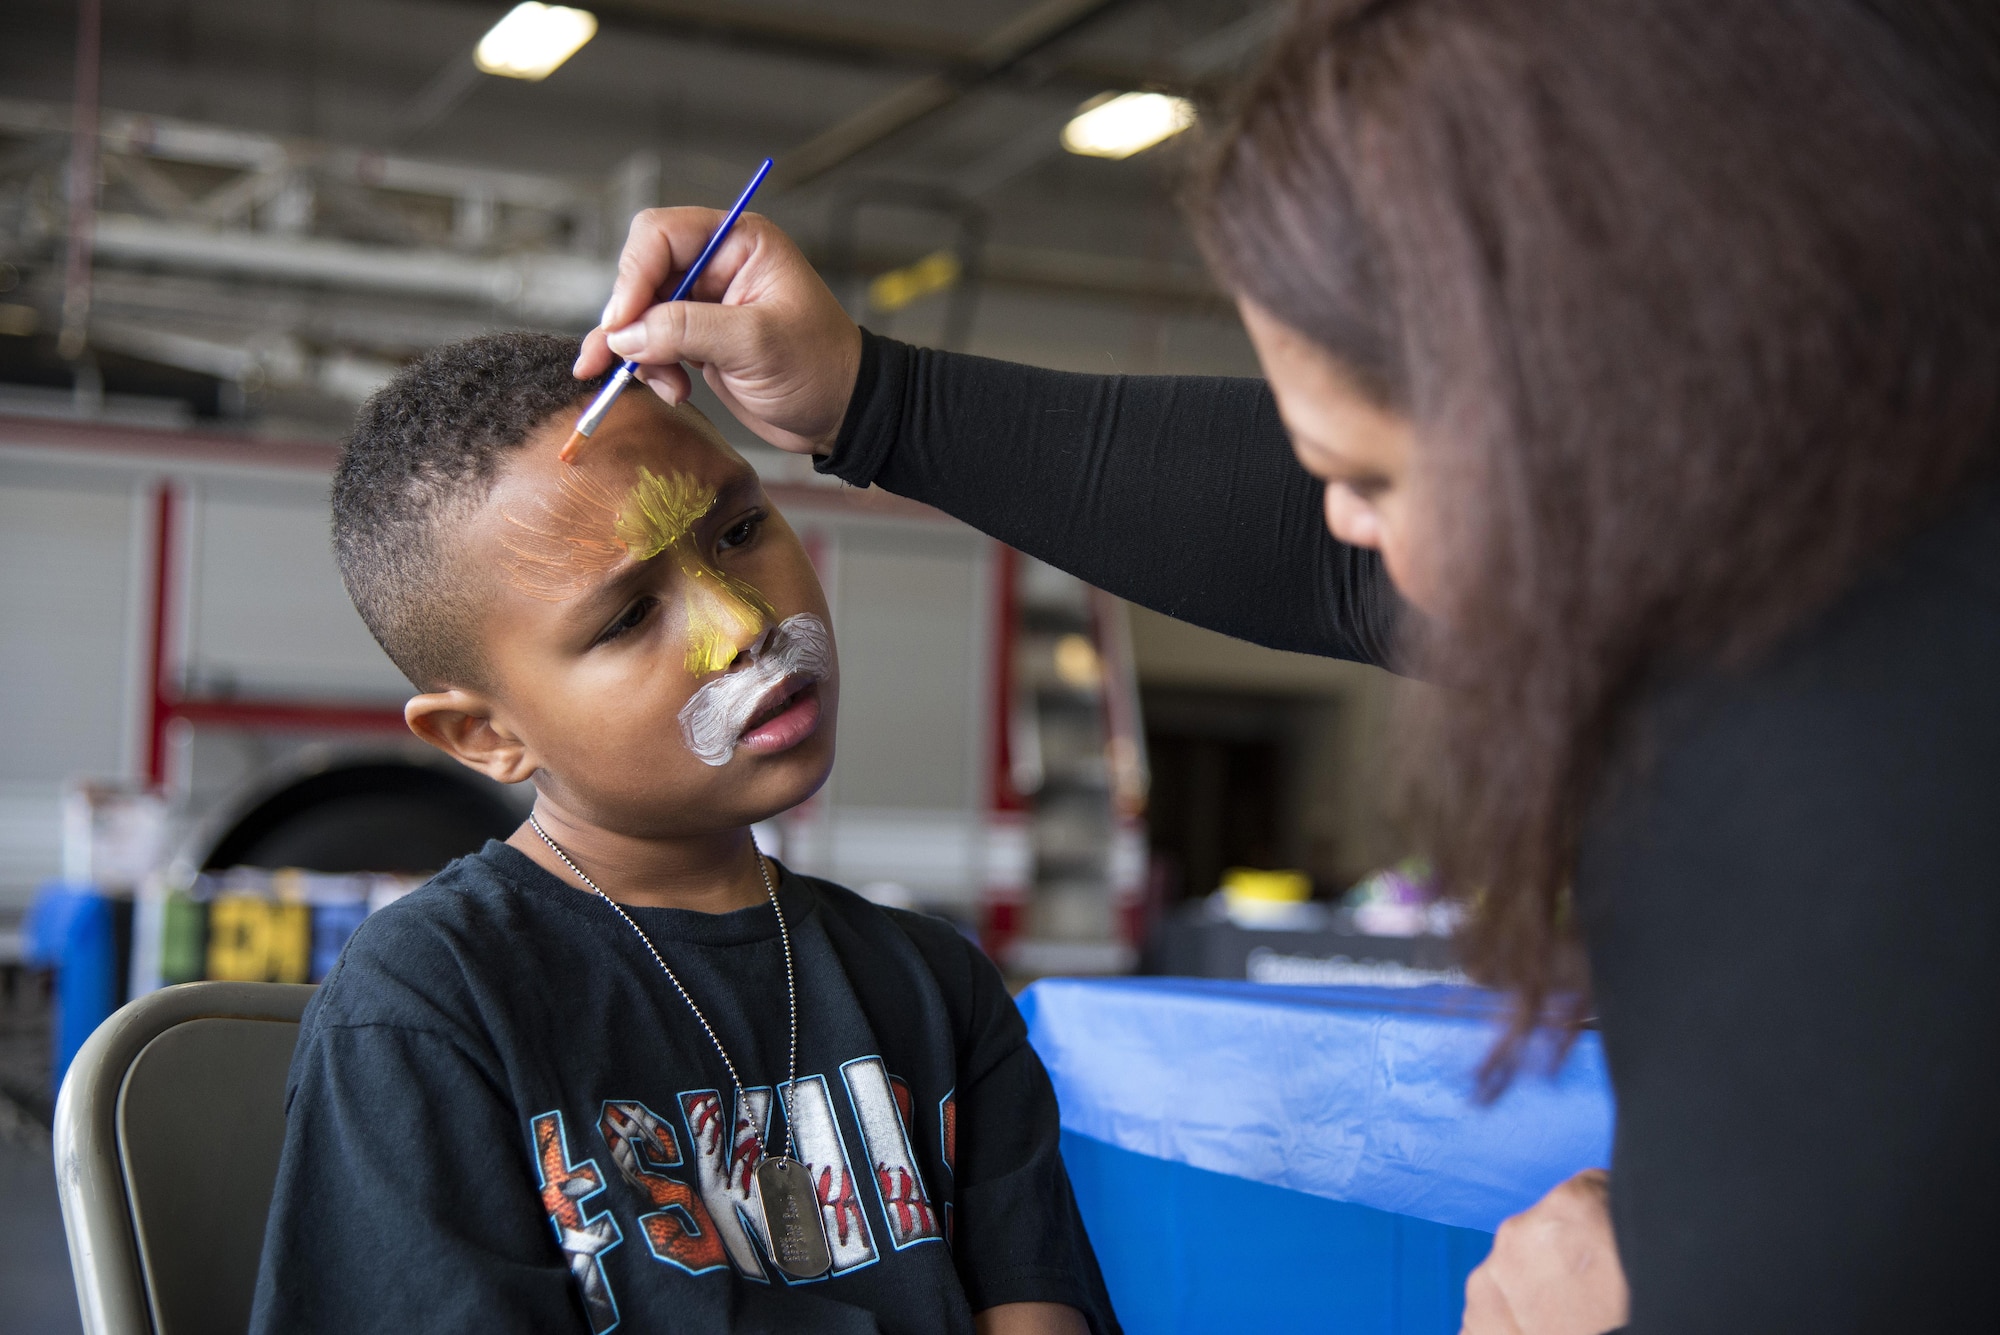 Staff Sgt. Dakota Lima, Armed Forces Medical Examiner System forensic toxicologist, paints the face of Reagan Cook, son of Tech. Sgt. Mandelyn Cook, 436th Logistics Readiness Squadron quality assurance evaluator, during the Dover Air Force Base First Responders’ Special Needs Day Oct. 8, 2016, at the 436th Civil Engineer Squadron Fire Department on Dover AFB, Del. The event featured face painting, information booths, several games and static emergency response vehicles available for tours. (U.S. Air Force photo by Senior Airman Aaron J. Jenne)